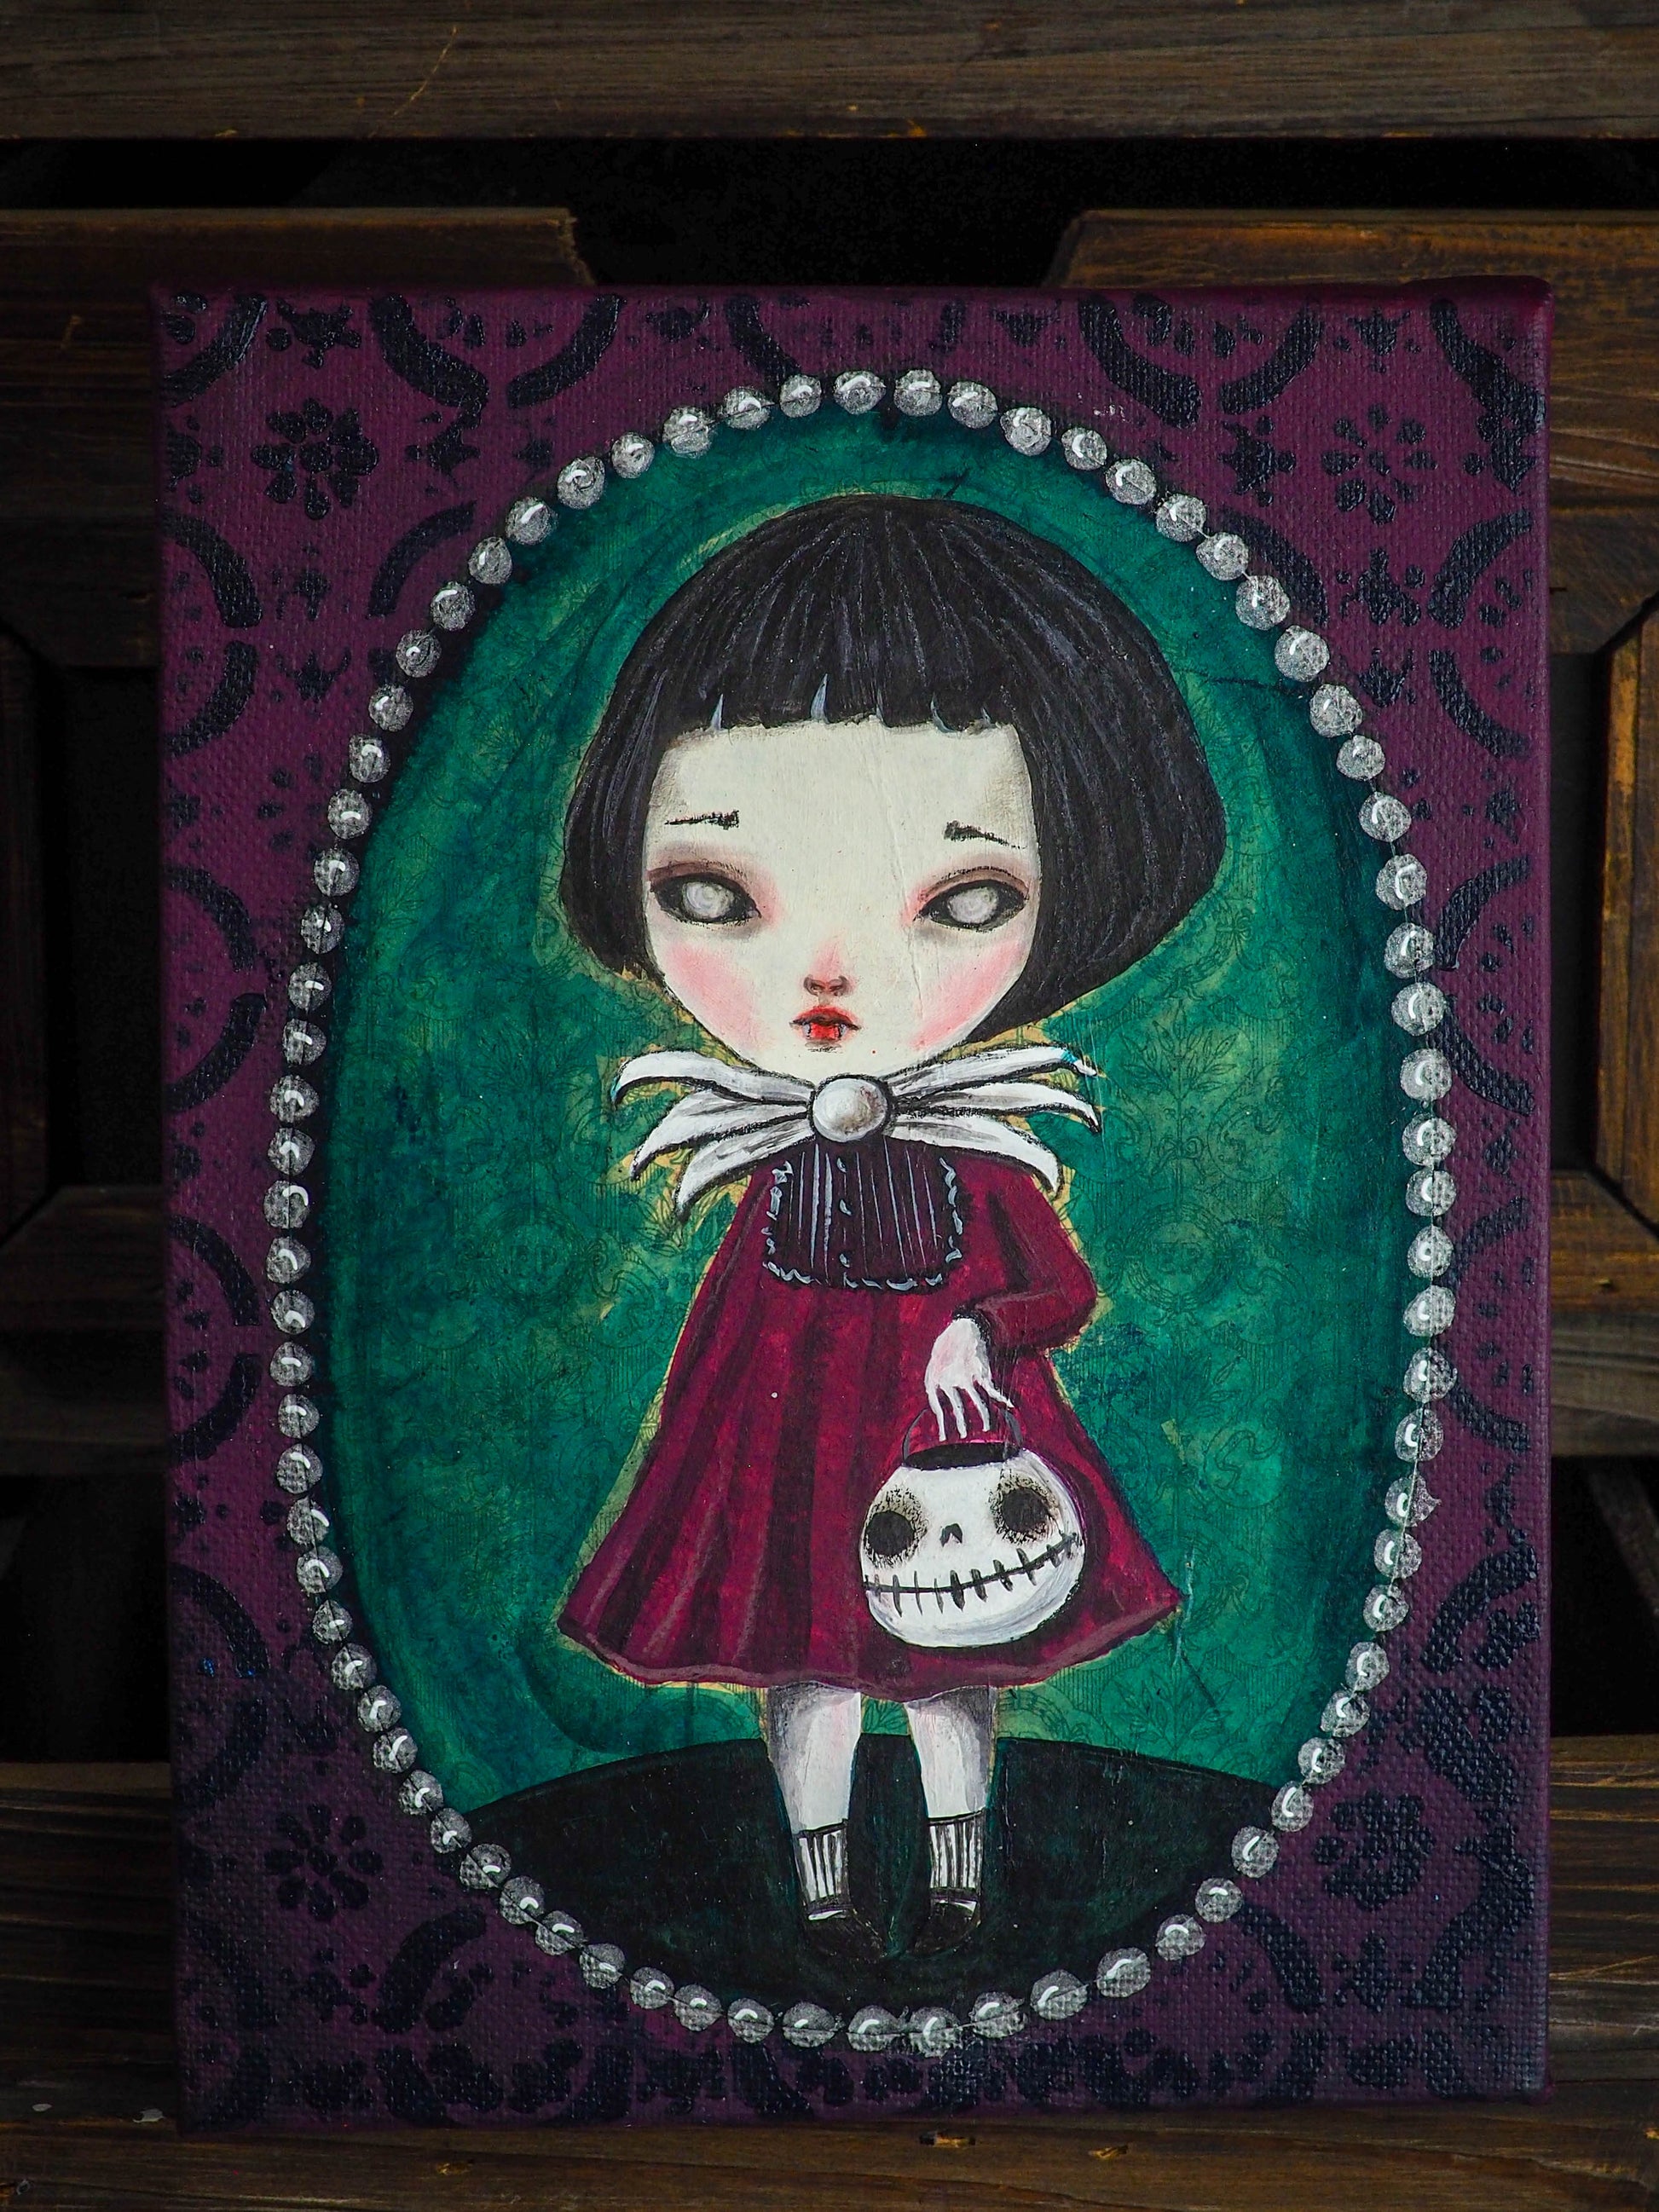 Original painting by Danita, a vampire undead zombie ghoul girl with Halloween with a skull pumpkin jack-o-lantern in her arms. Whimsical and surreal art perfect as home decor this Halloween Night.